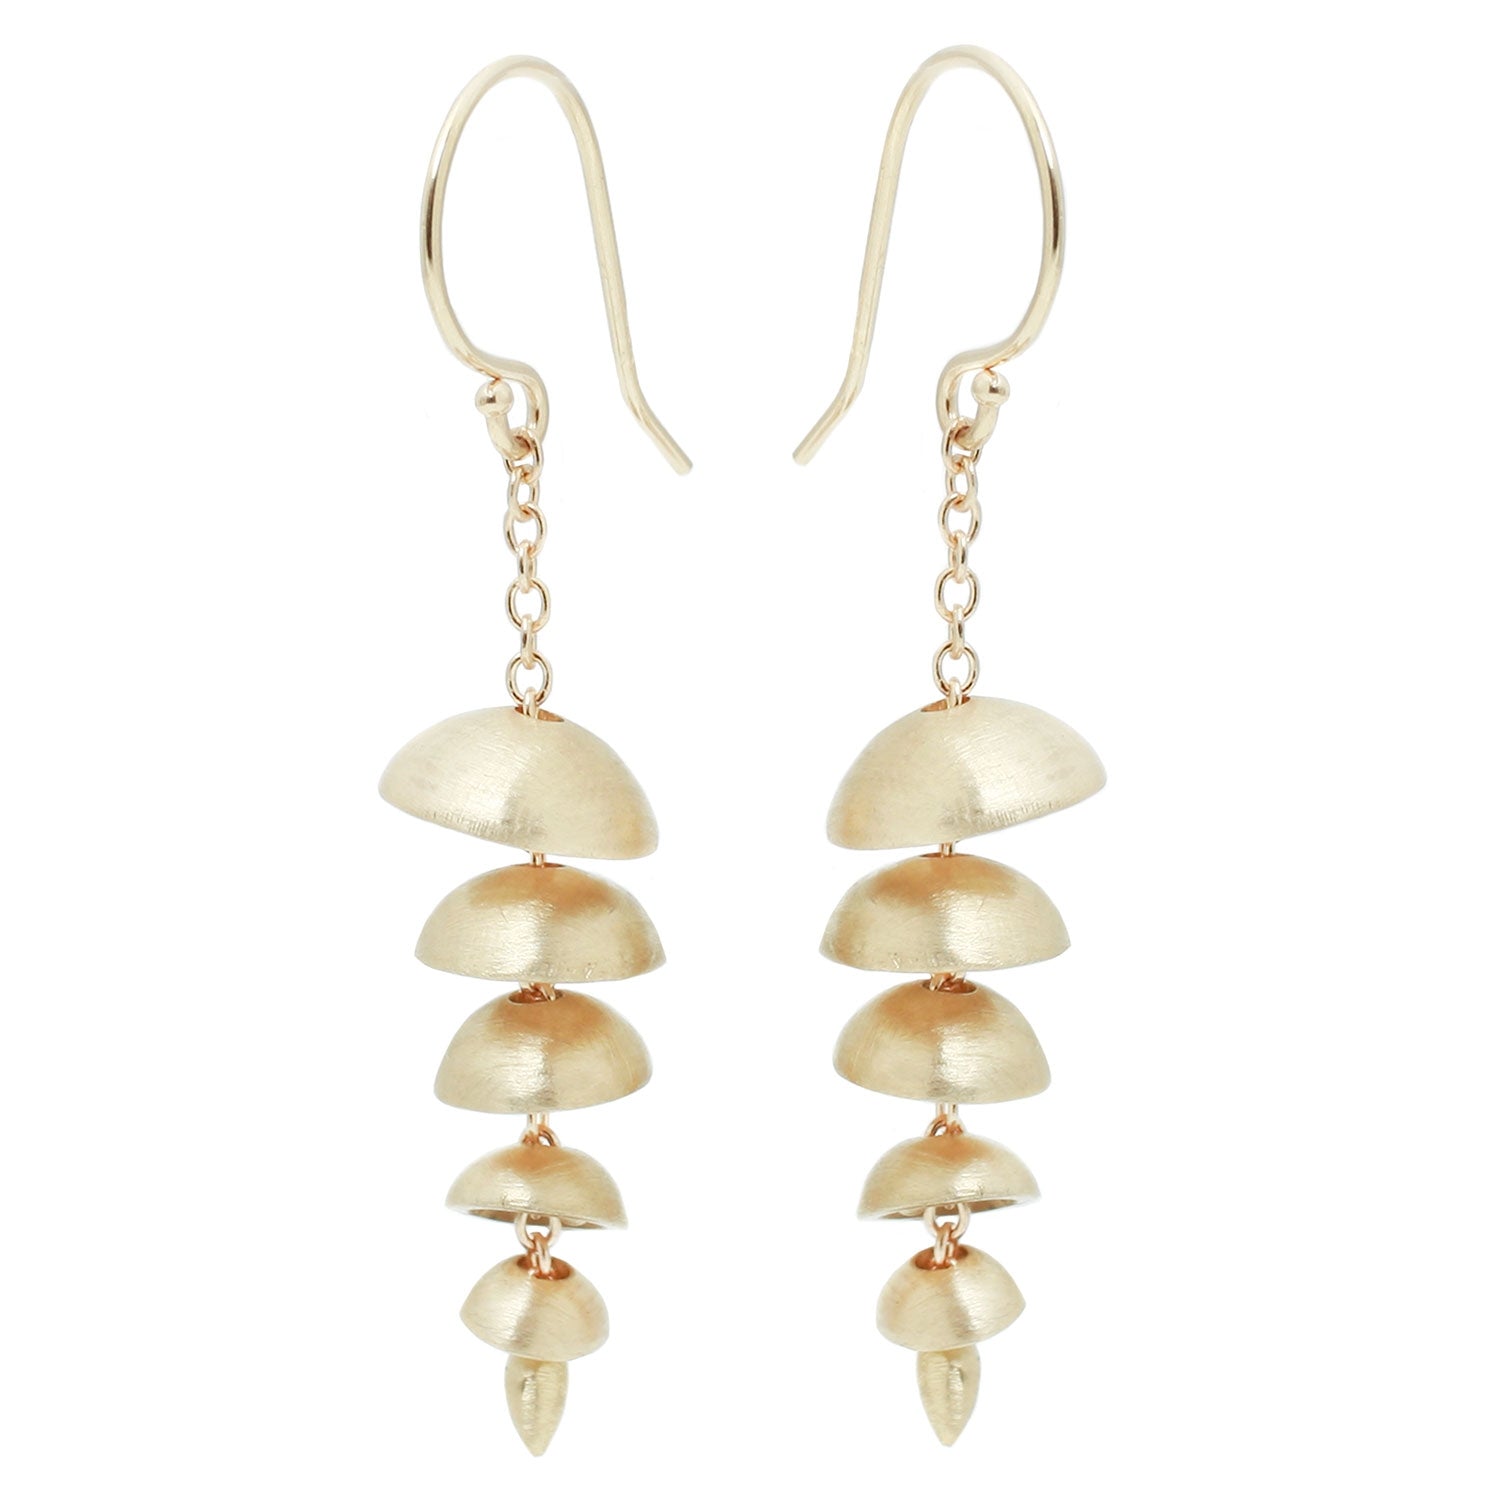 Sarah Swell Gold Chime Earrings